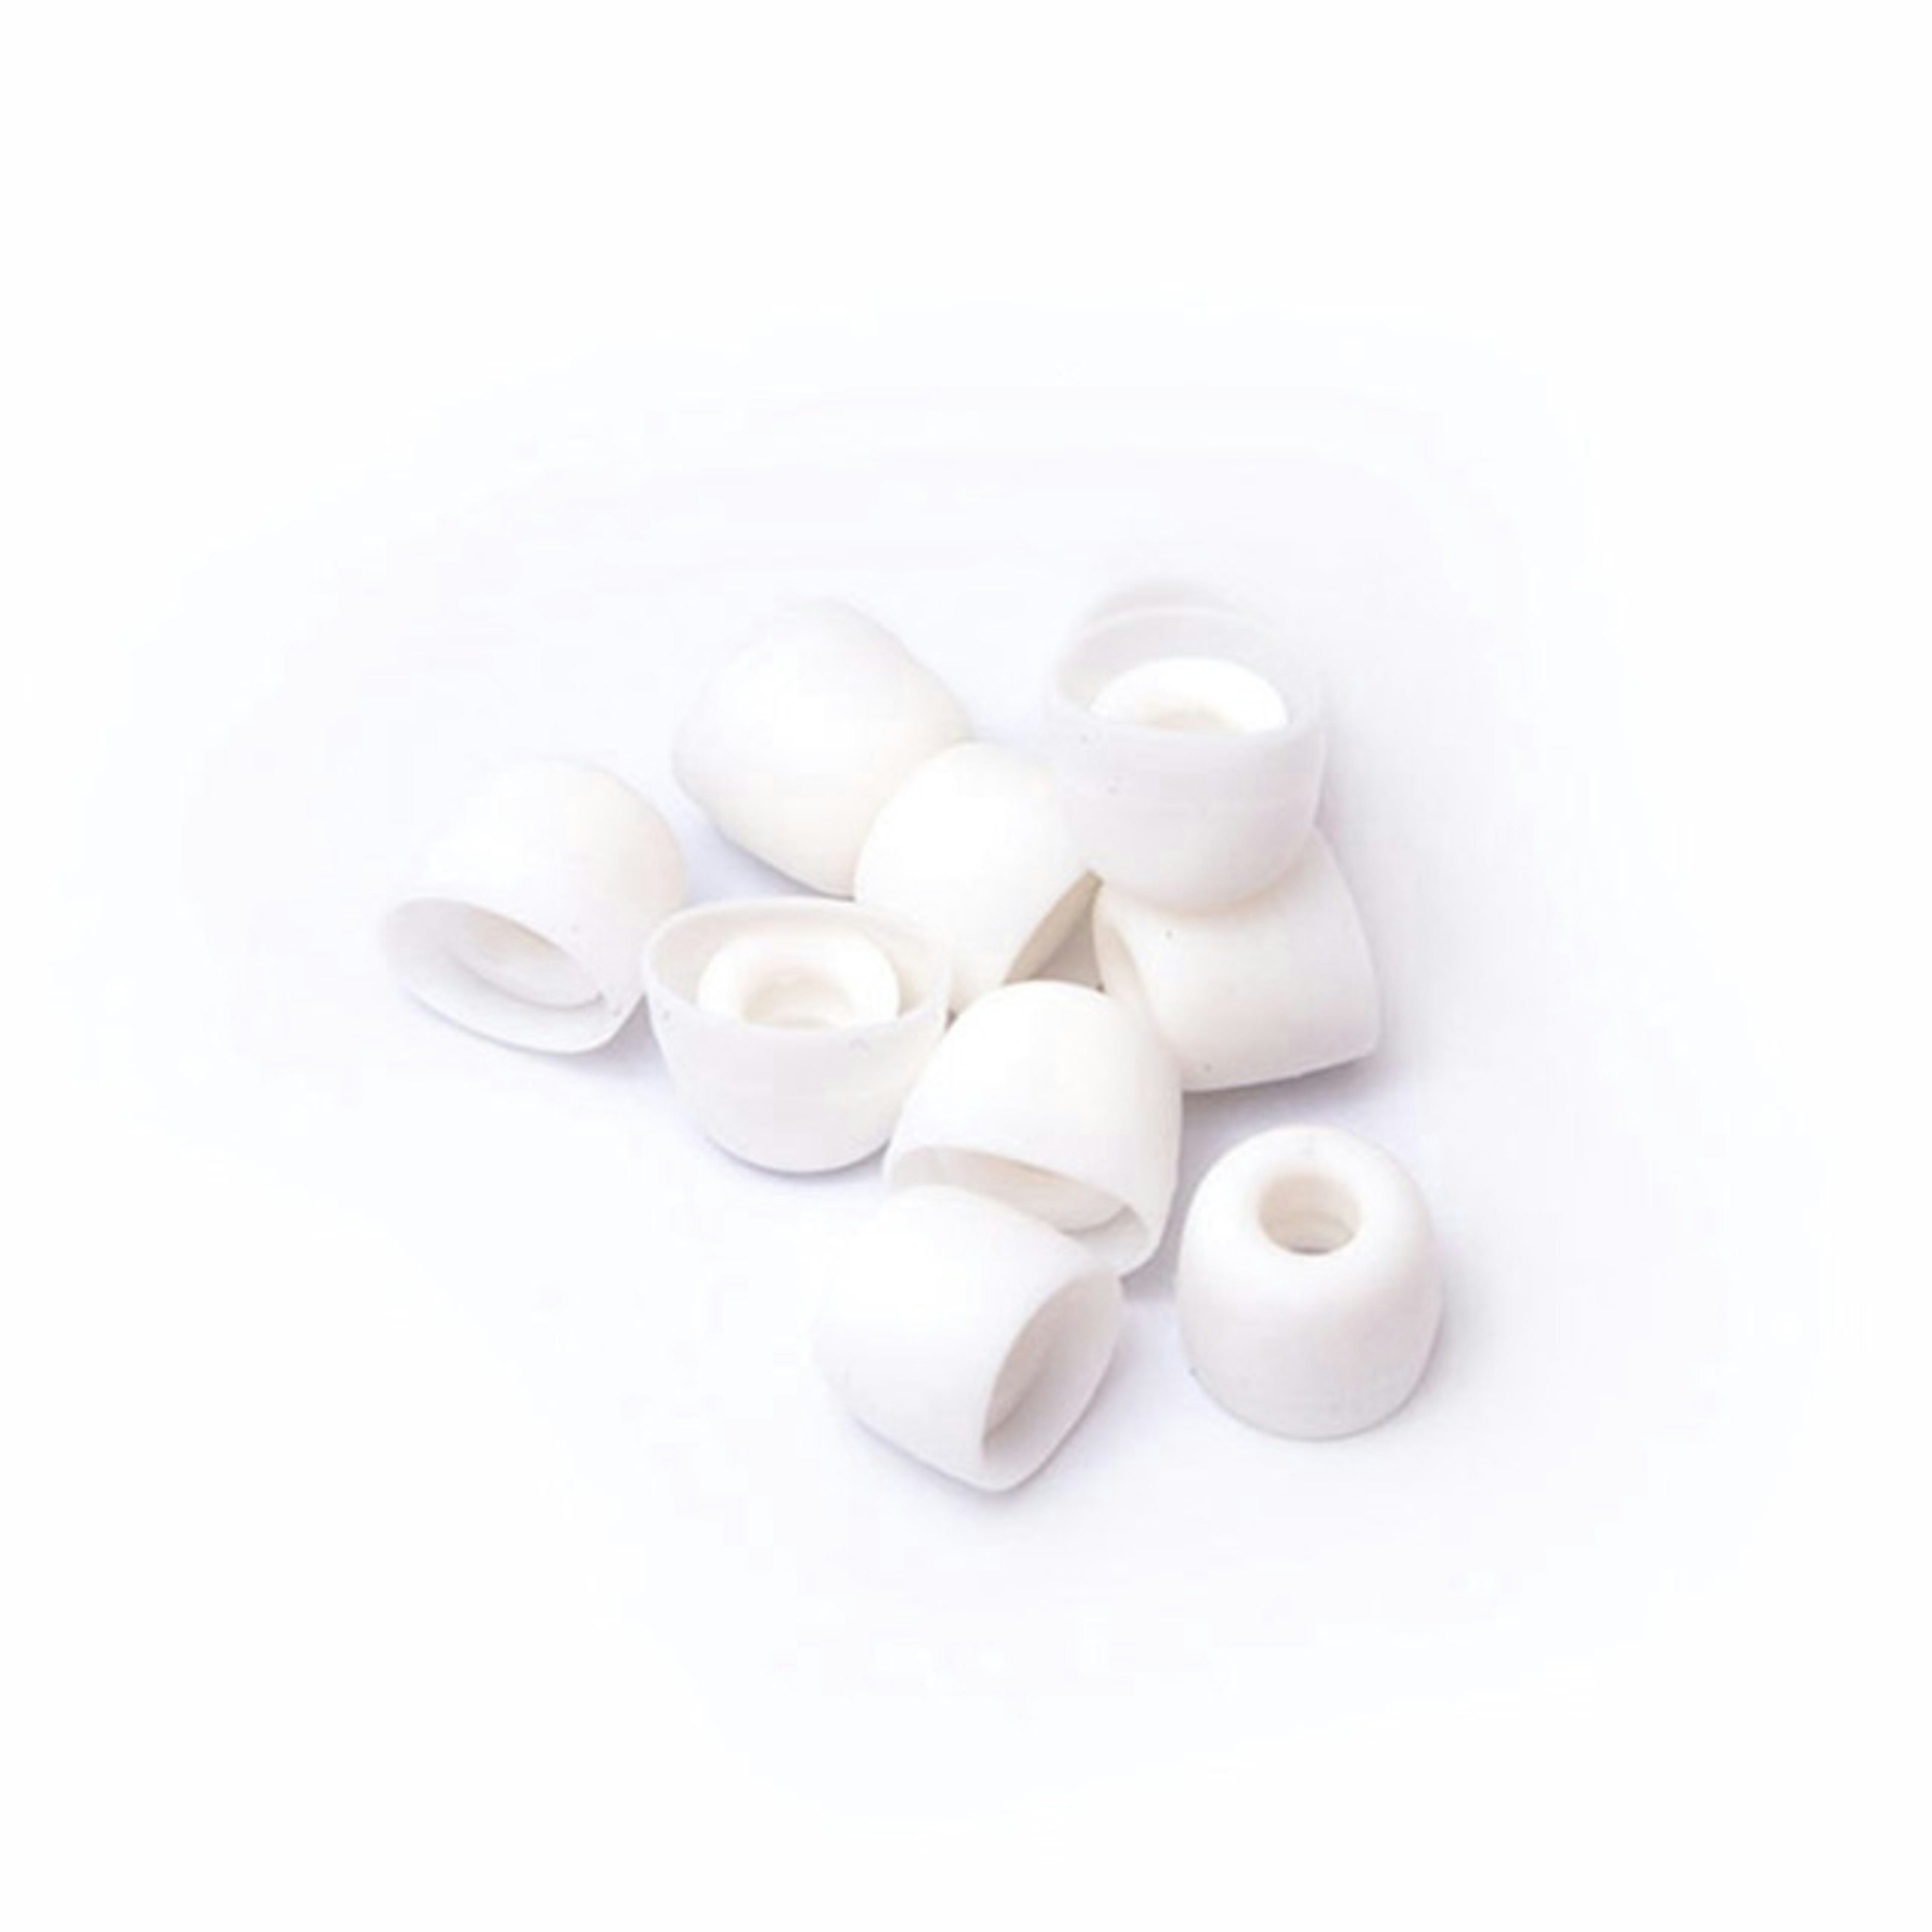 Ear adapter, white, 10 pieces (L)